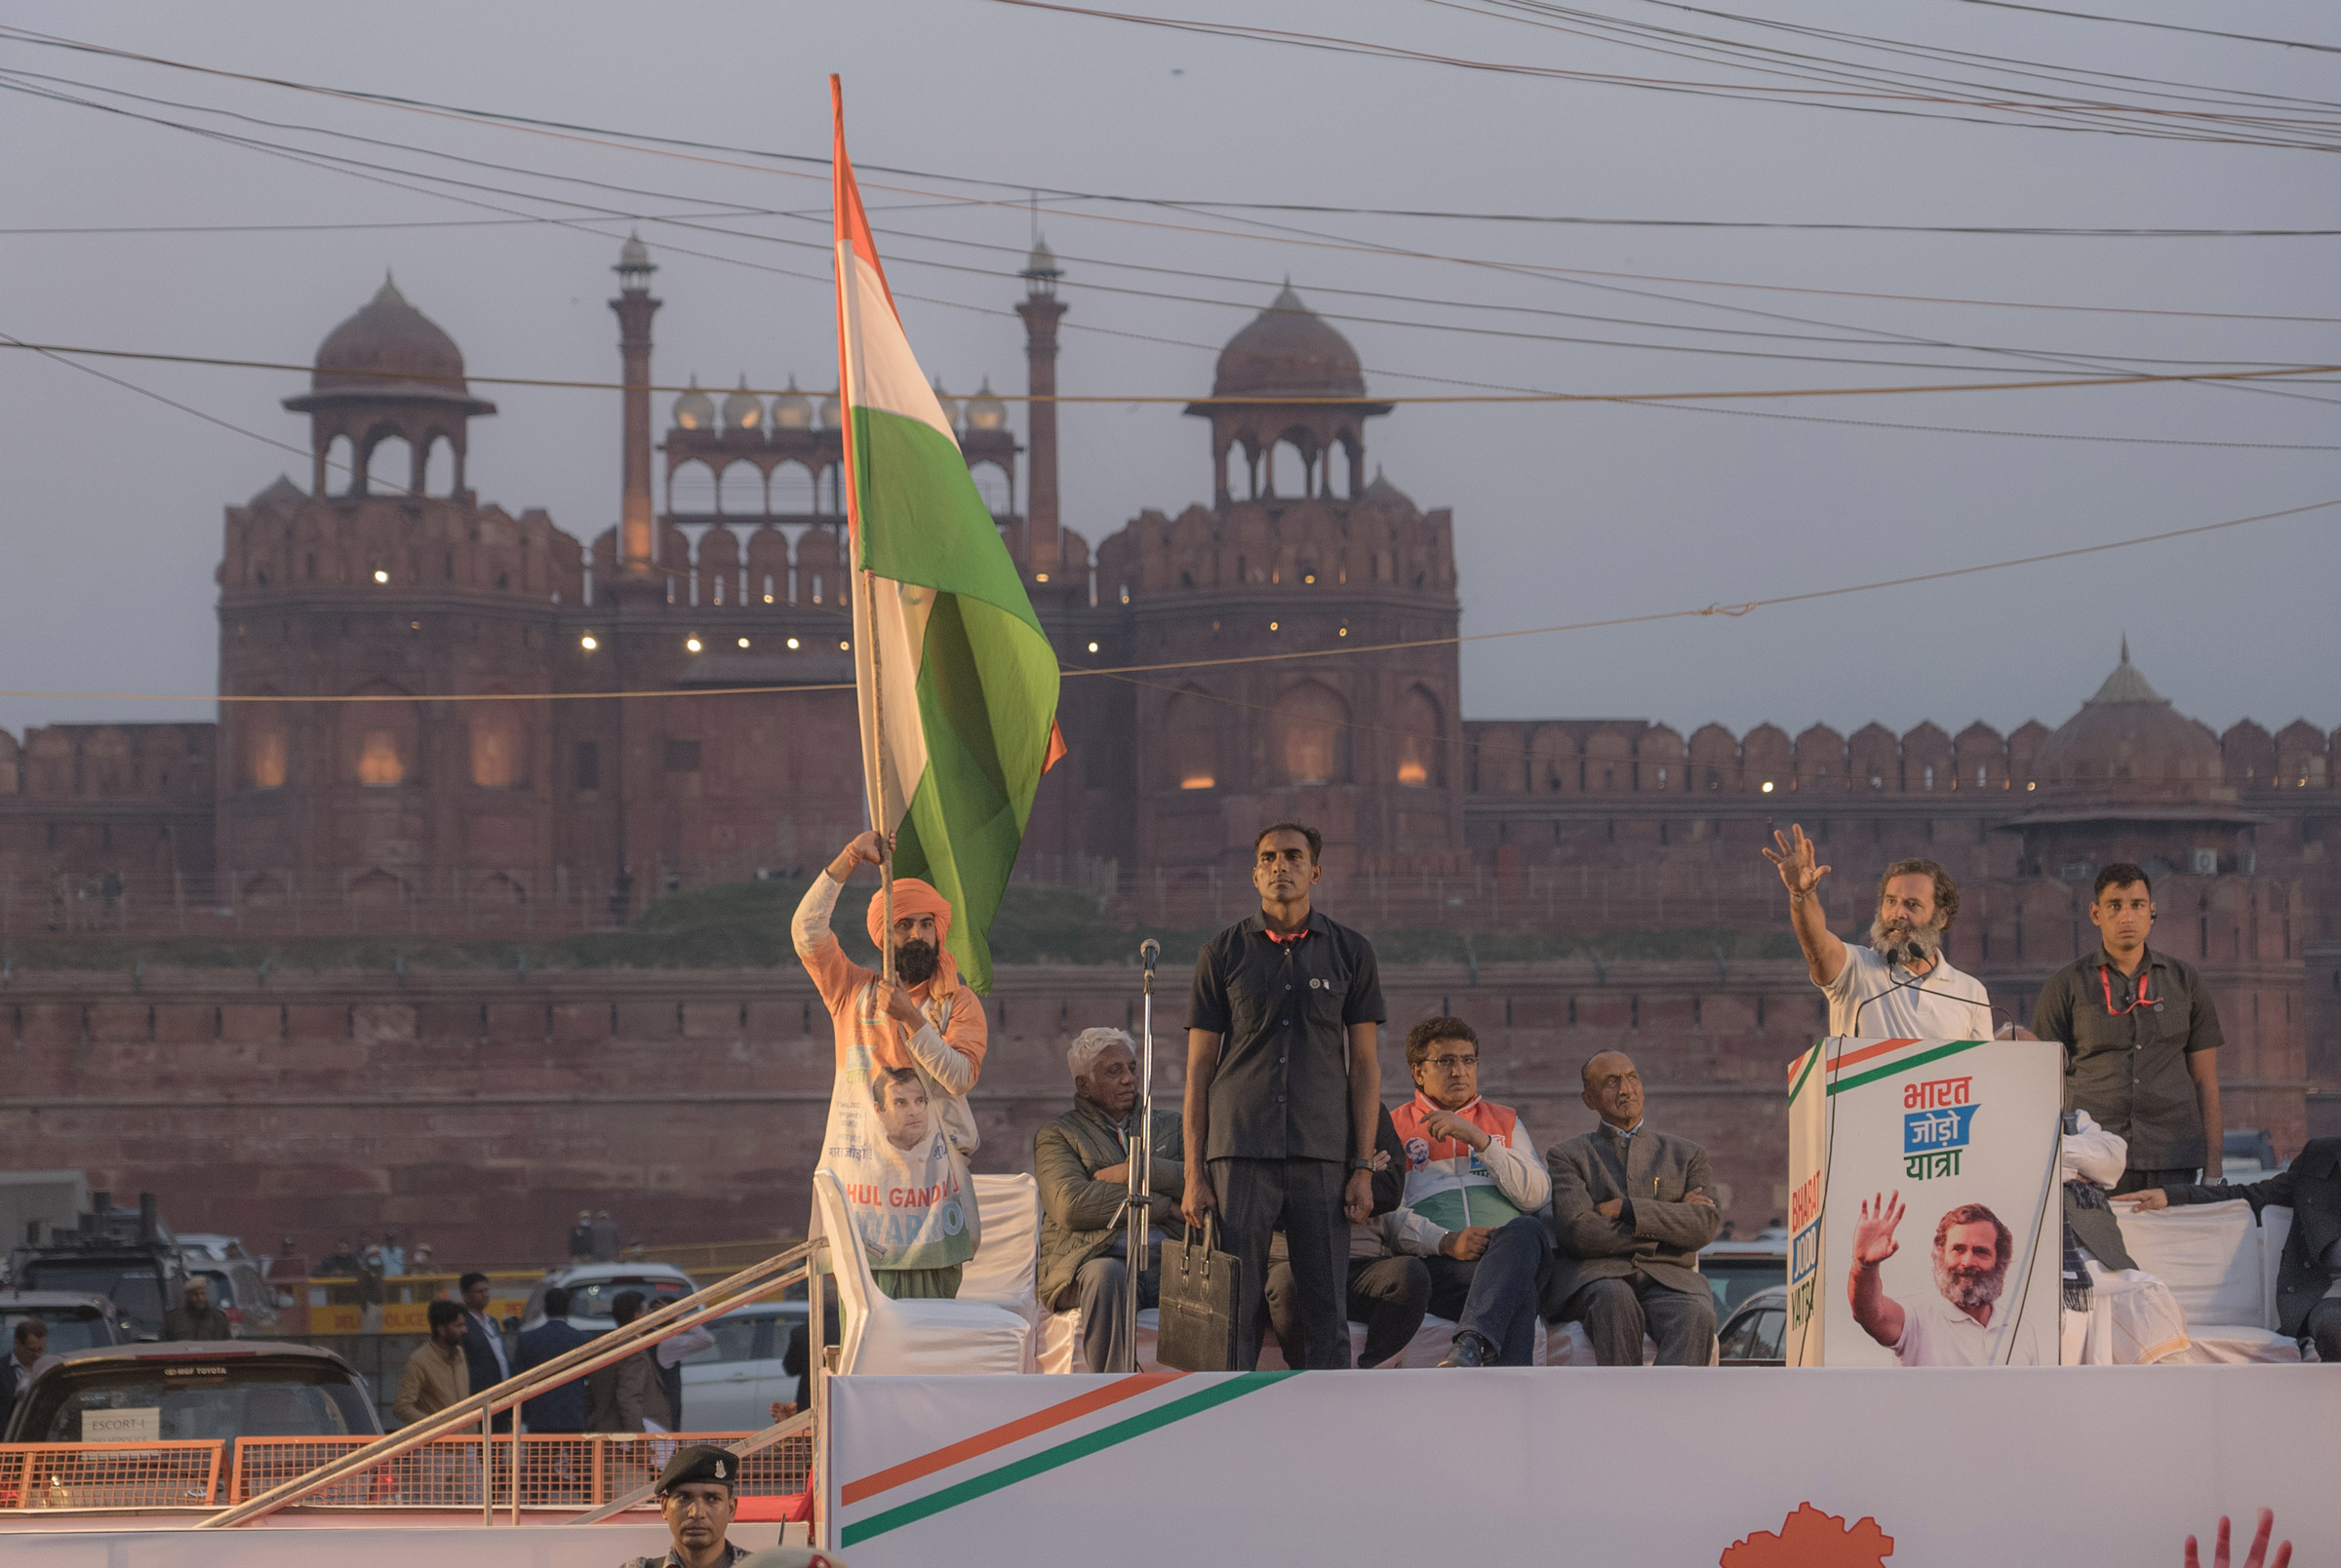 Rahul Gandhi addresses his supporters in front of the Red Fort during the Bharat Jodo Yatra in New Delhi, India on Dec. 24, 2022. He is sharing the stage with Mallikarjun Kharge, the president of Indian National Congress, and film star Kamal Haasan. (Ronny Sen for TIME)